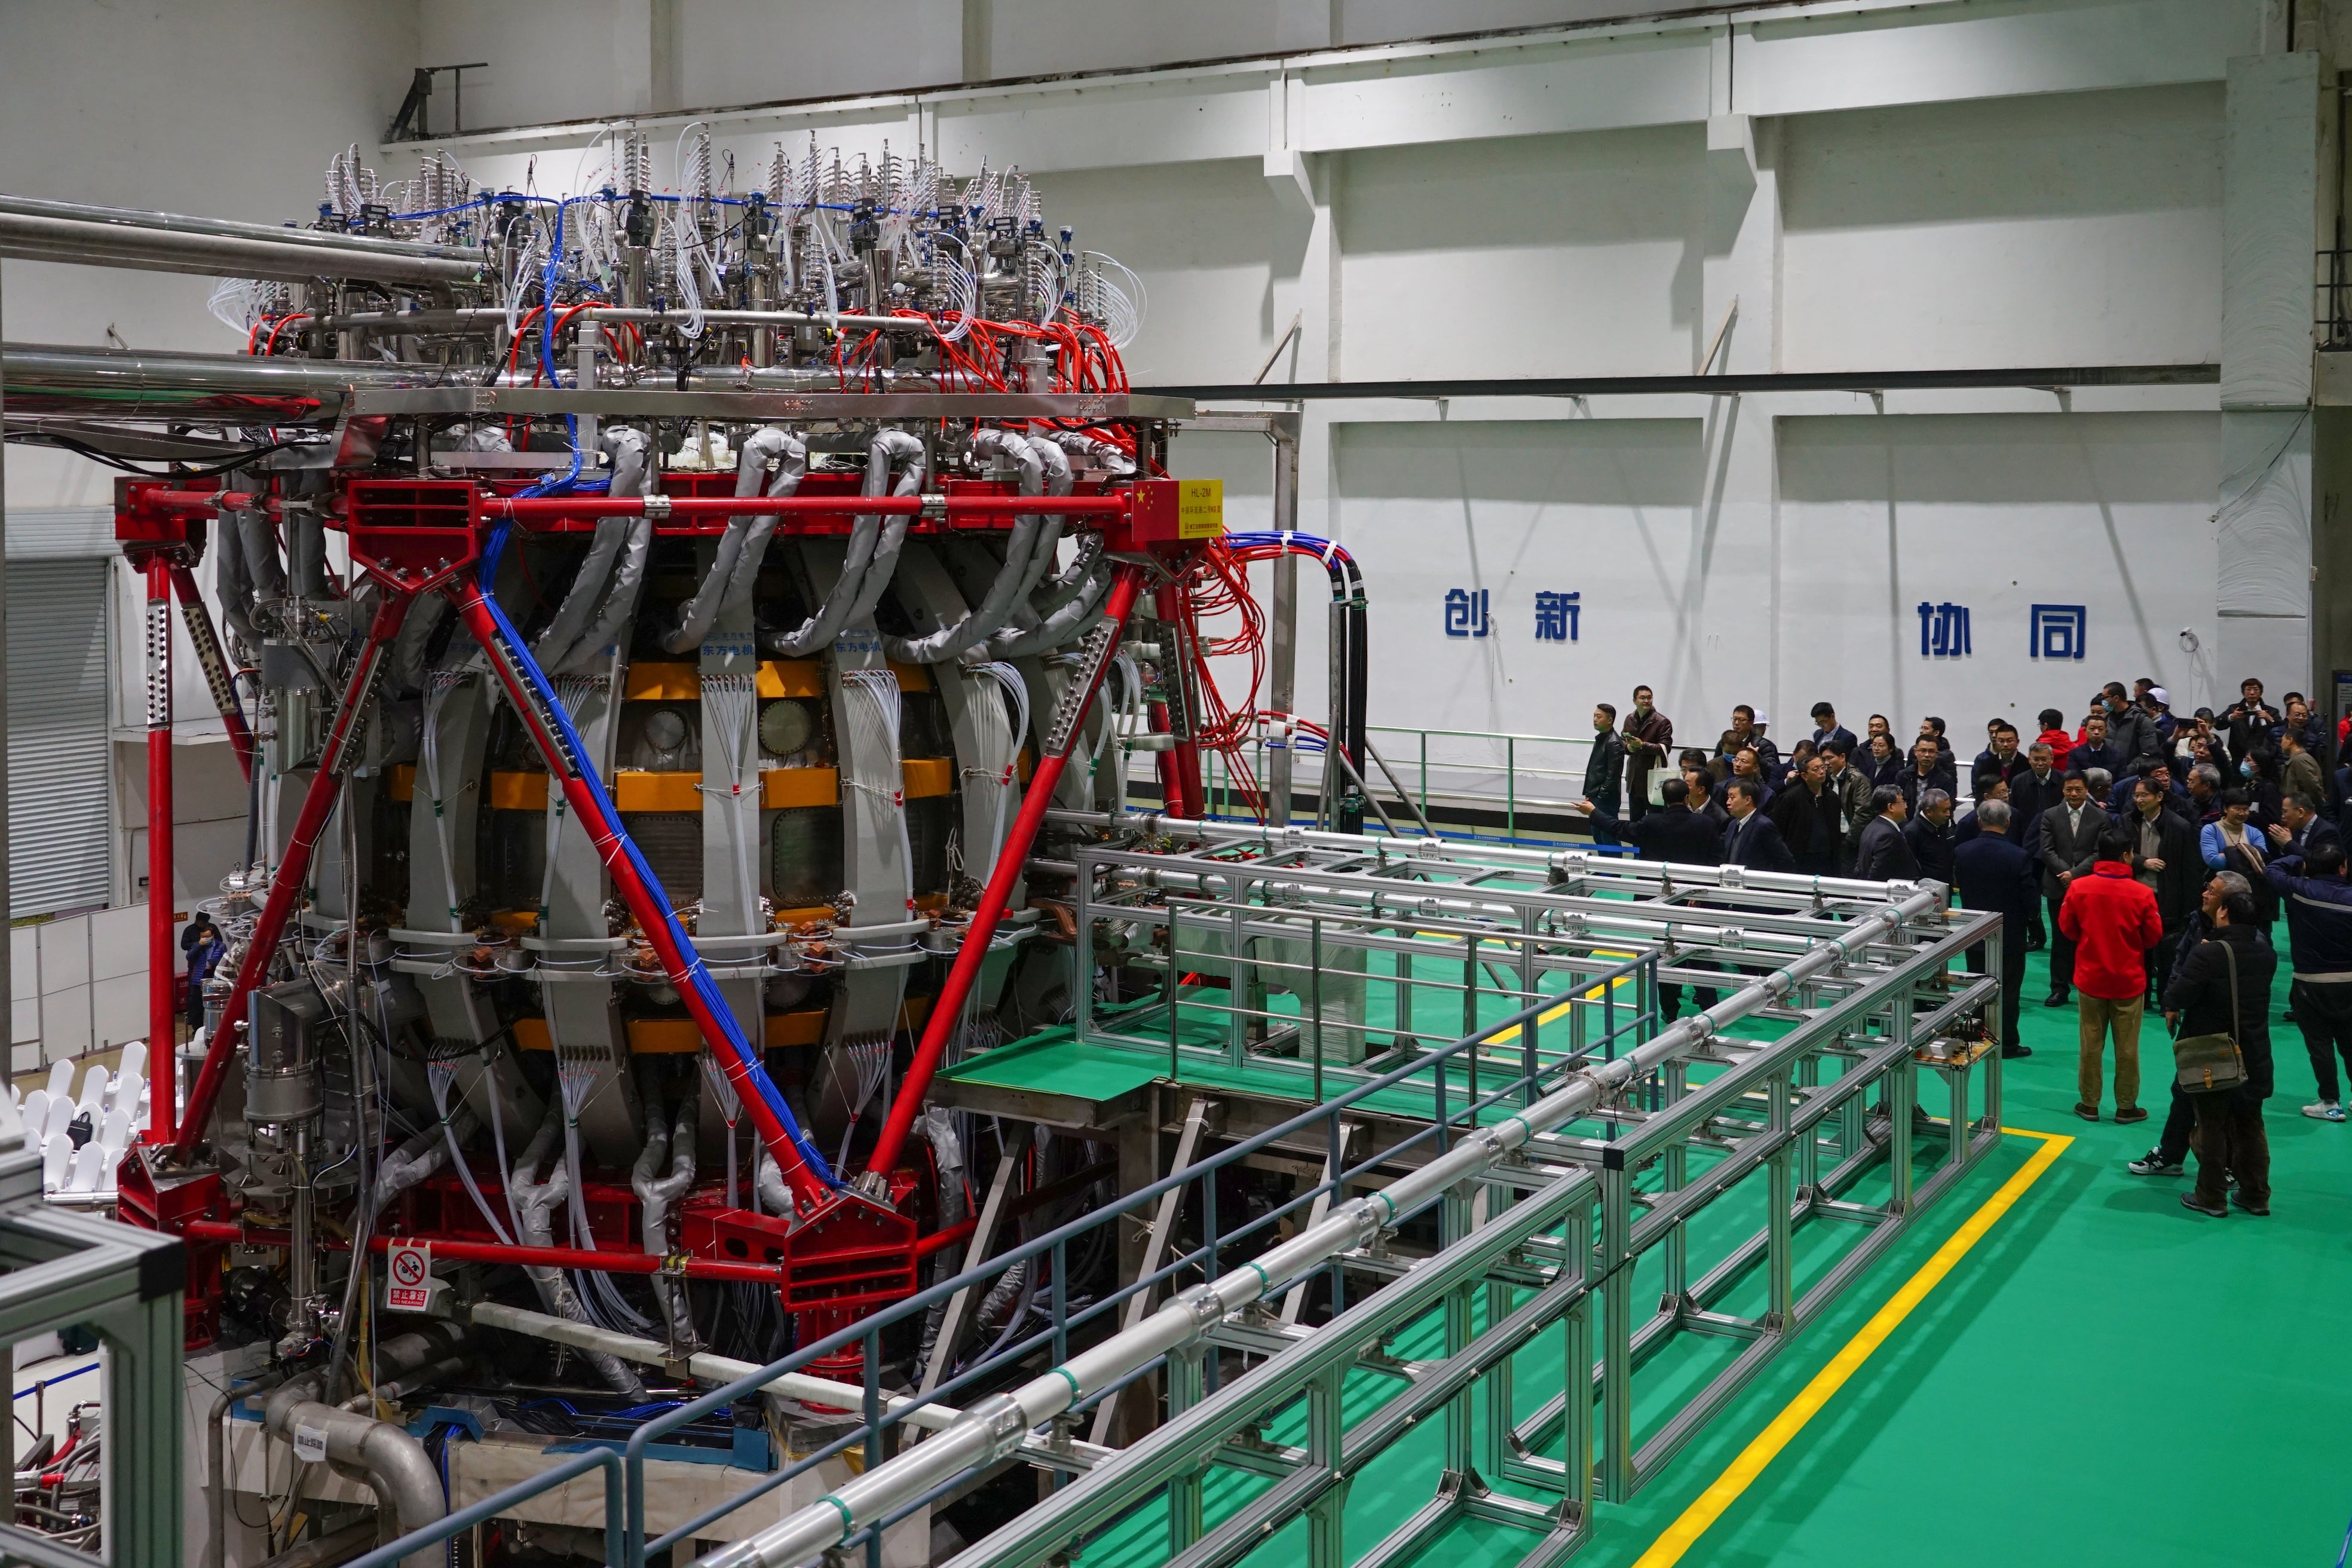 The HL-2M tokamak achieved it was first plasma discharge on 4 December 2020